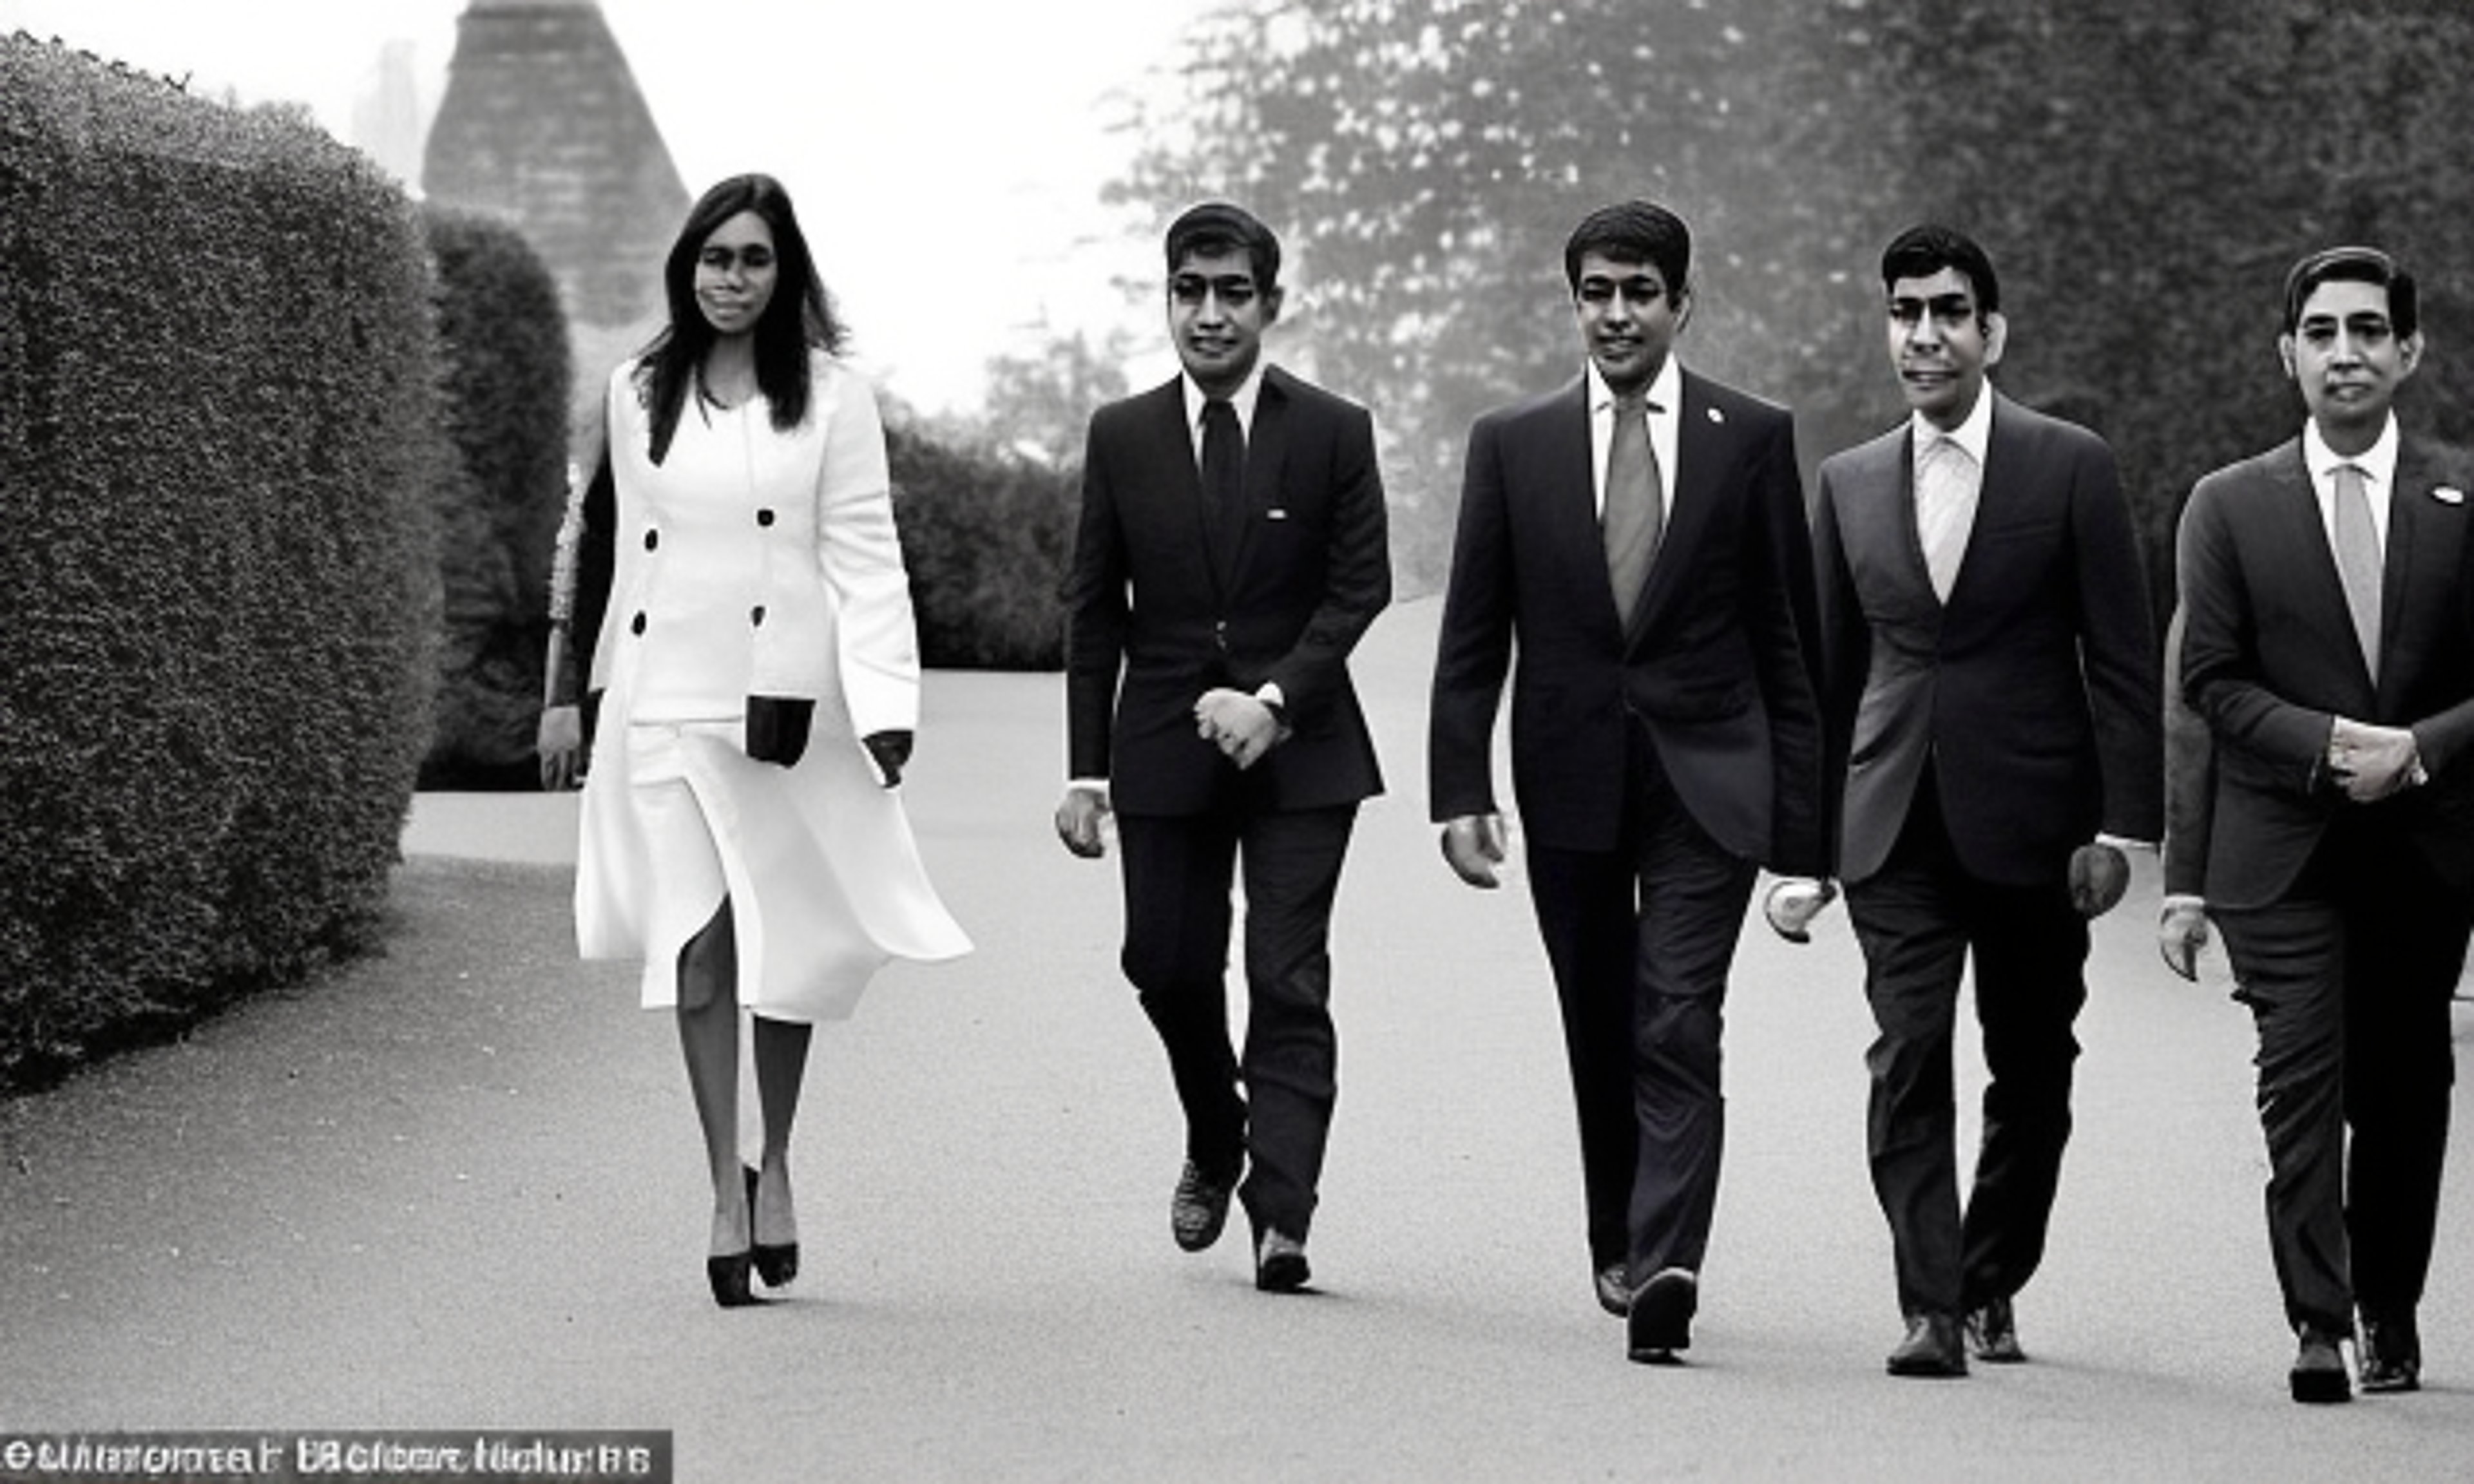 PM Rishi Sunak and Wife's Fortune Drops by £200 Million, According to Sunday Times Rich List